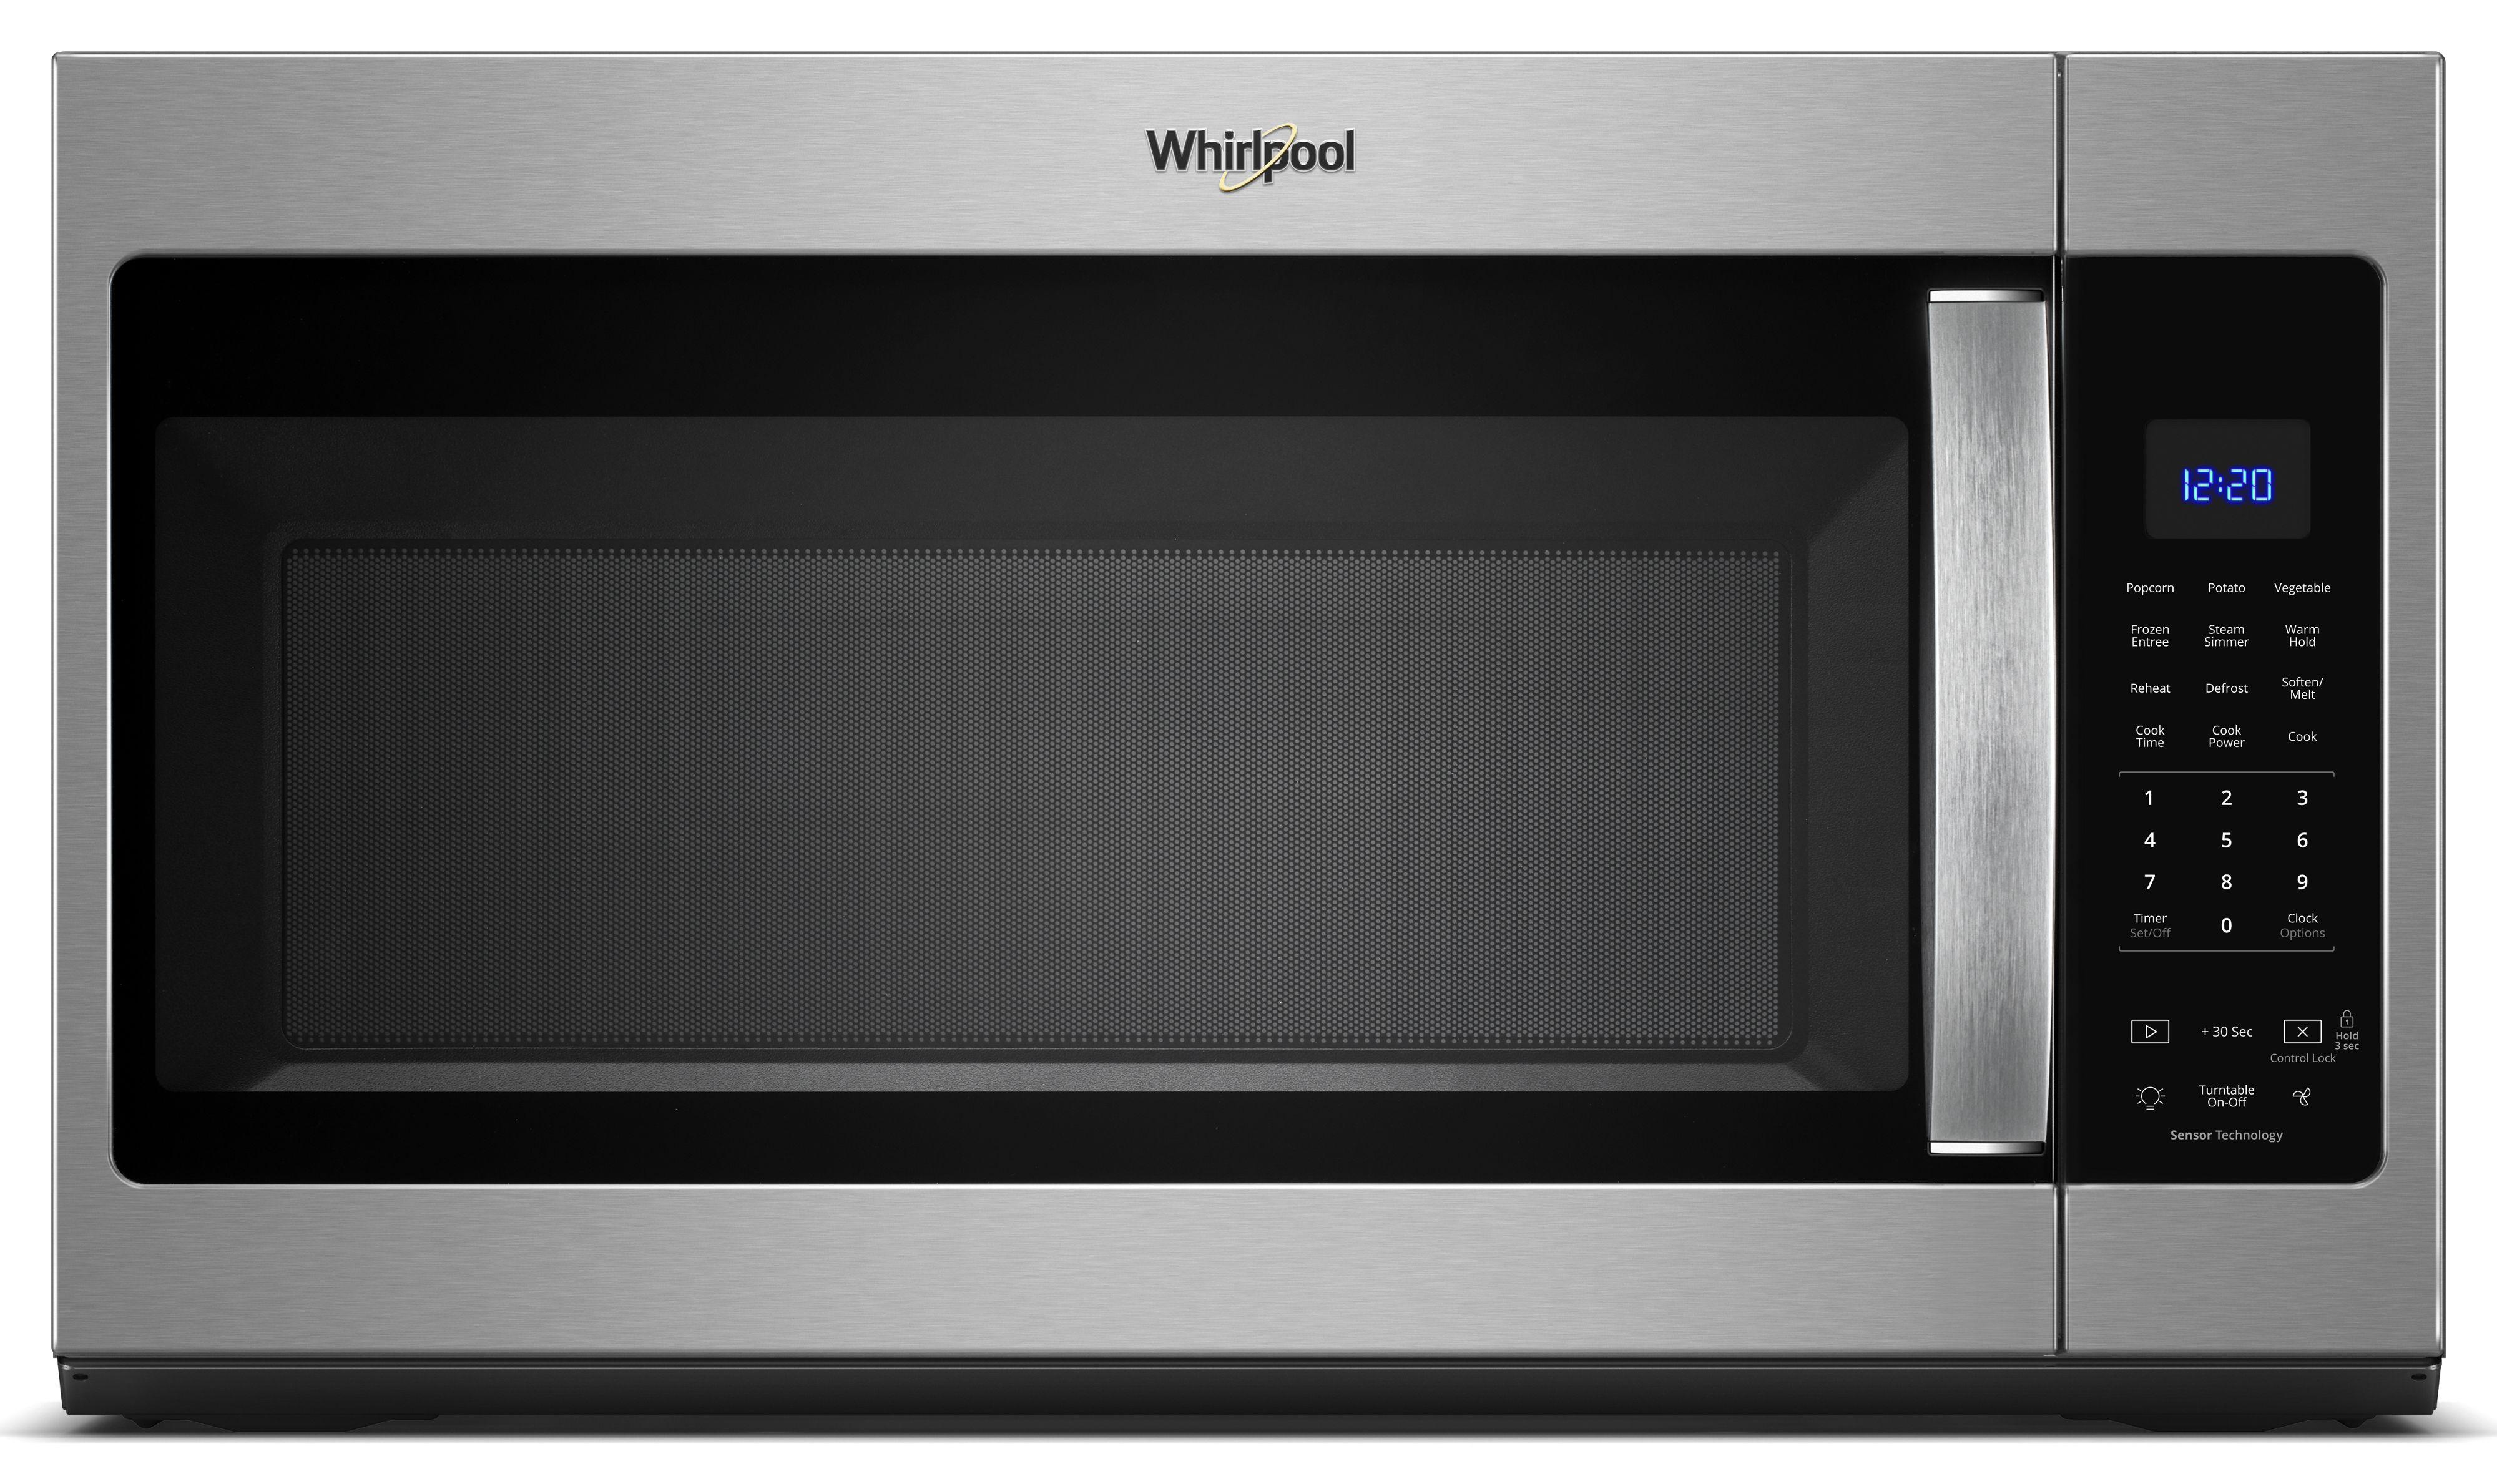 Whirlpool WMH32519HZ 30 Inch Over the Range Microwave Oven 1.9 cu. ft